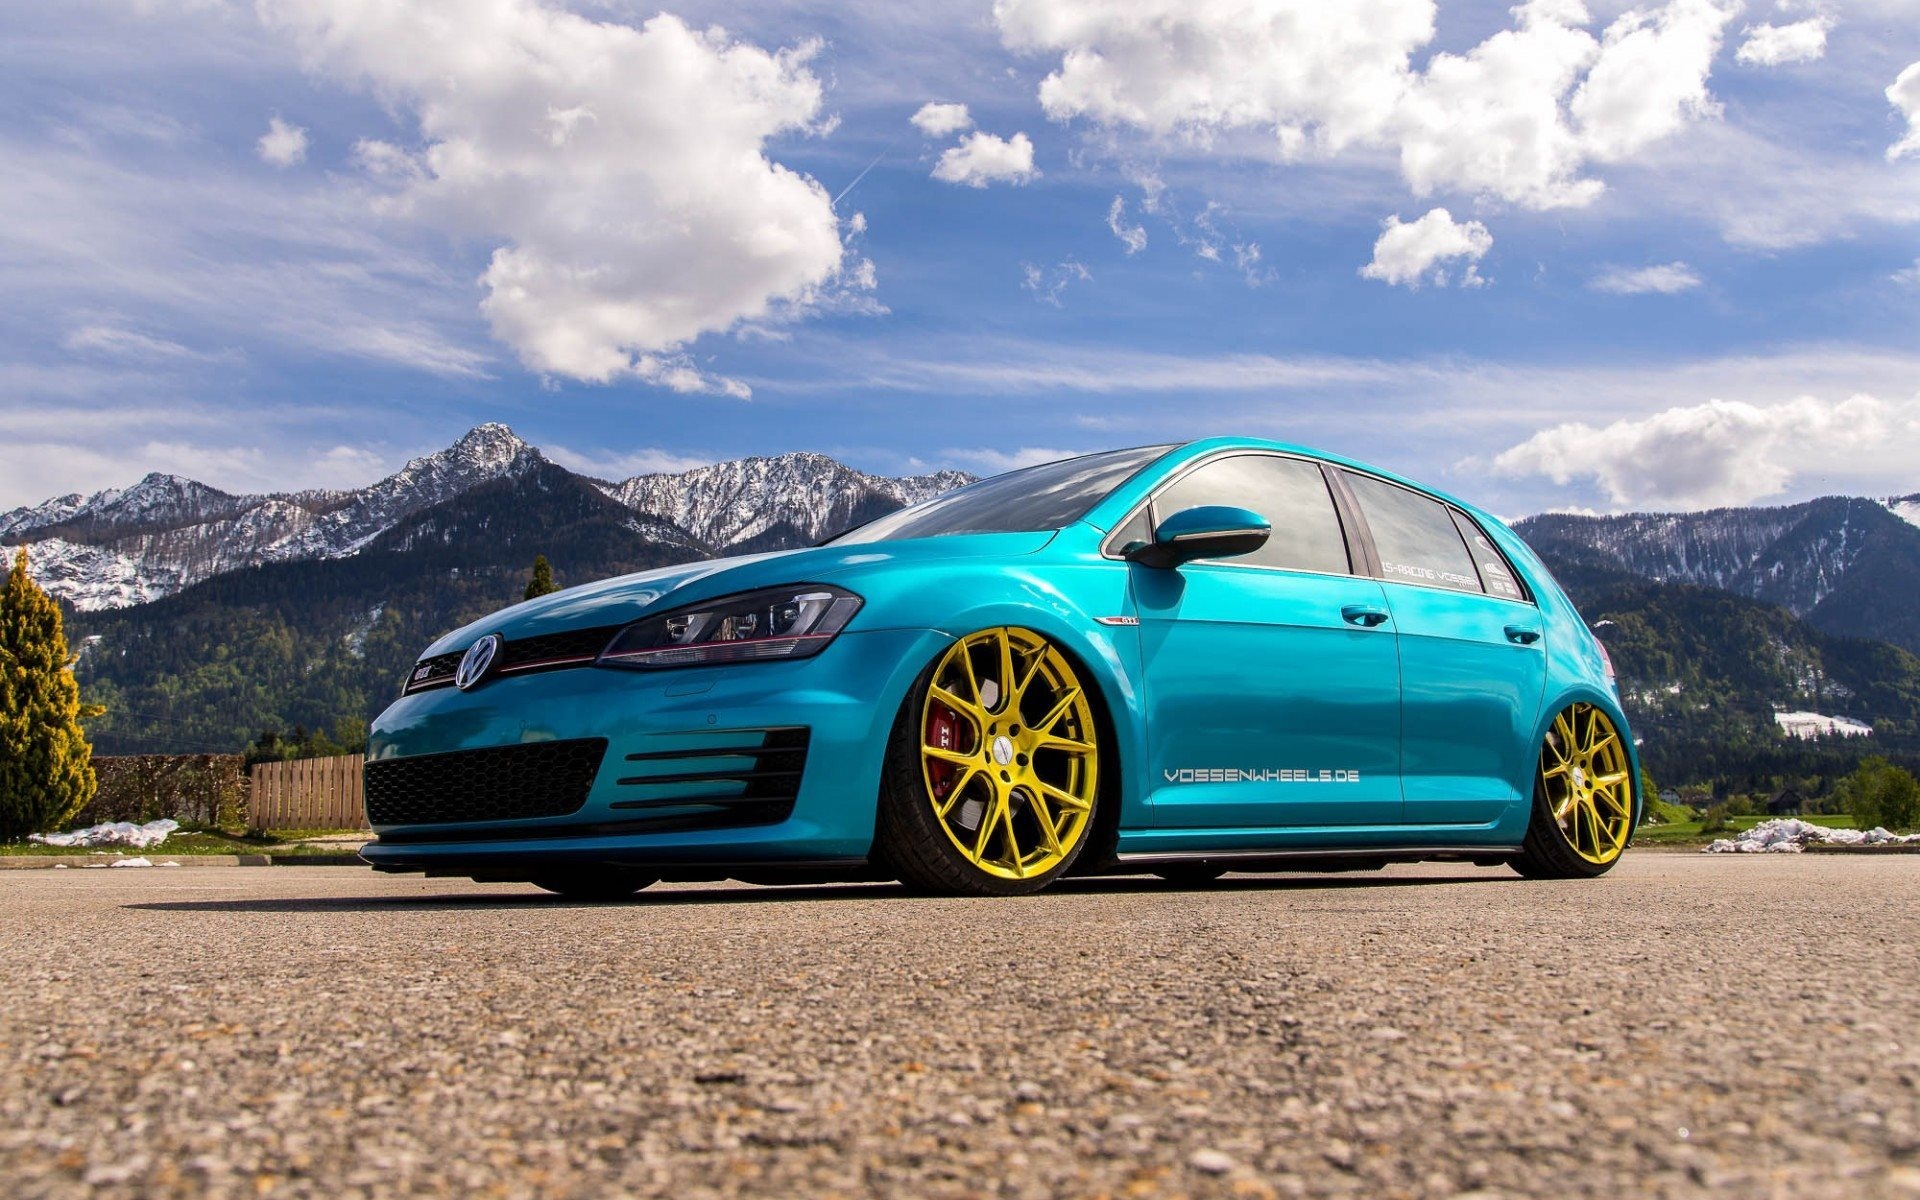 Volkswagen Golf, Tuned Golf GTI, Blue and gold accents, HD wallpapers, 1920x1200 HD Desktop